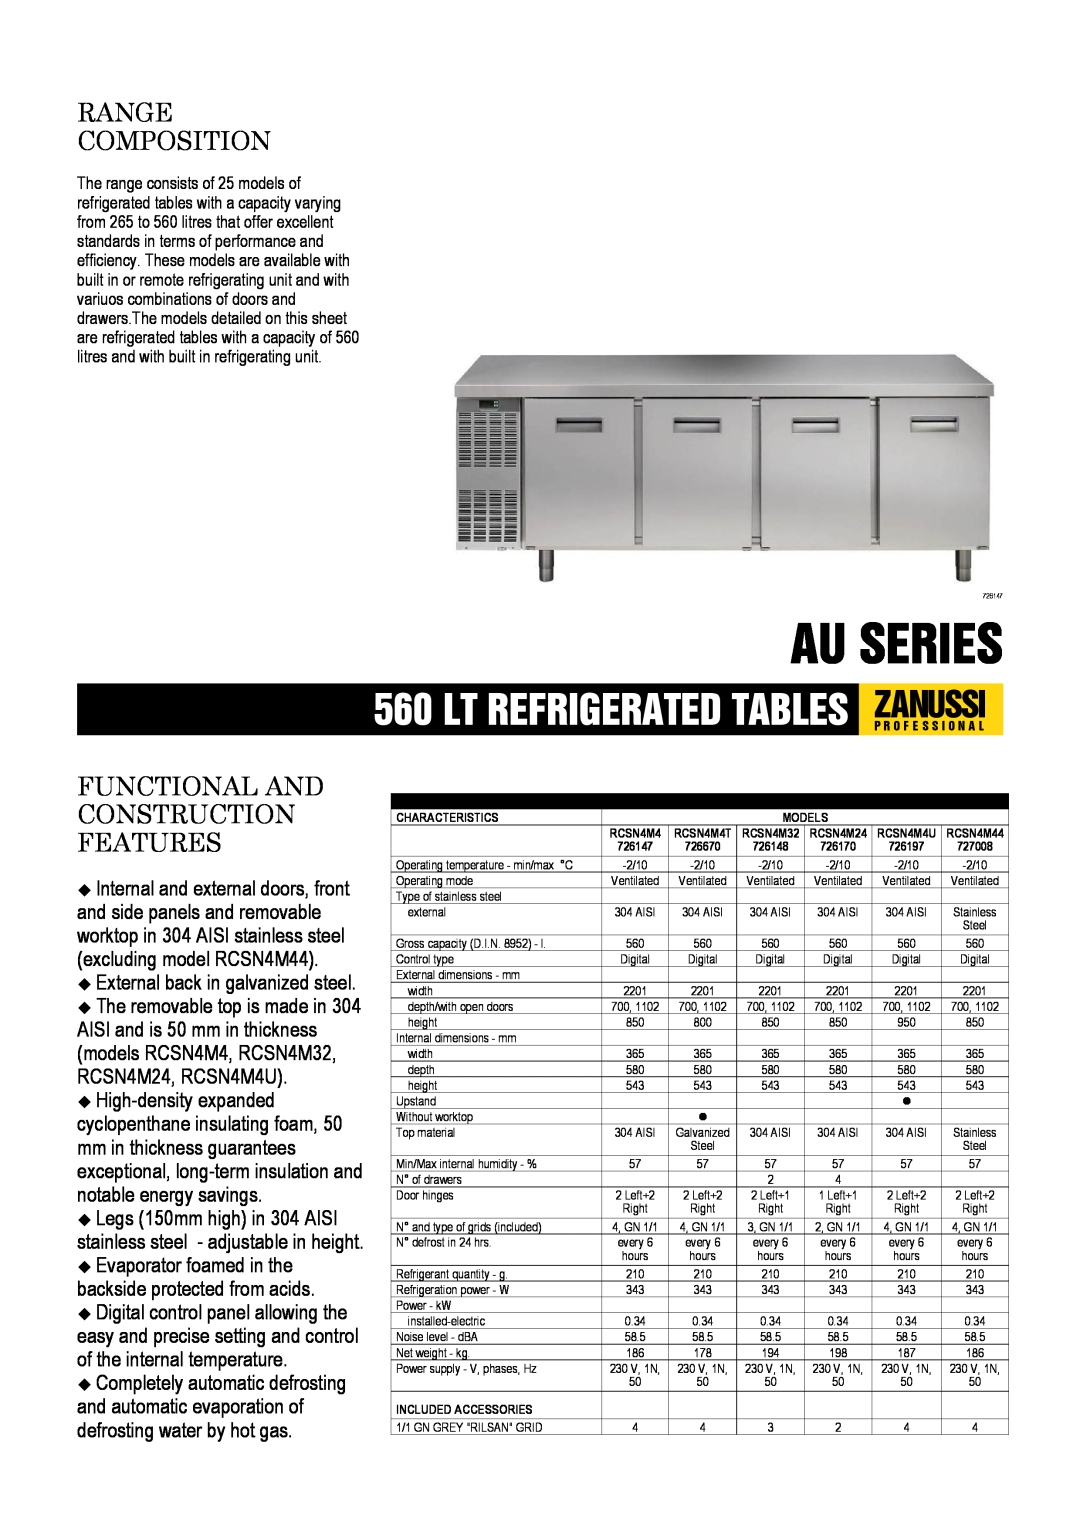 Zanussi 726170, 726670, 726197, 726147, 727008 dimensions Au Series, Range Composition, Functional And Construction Features 